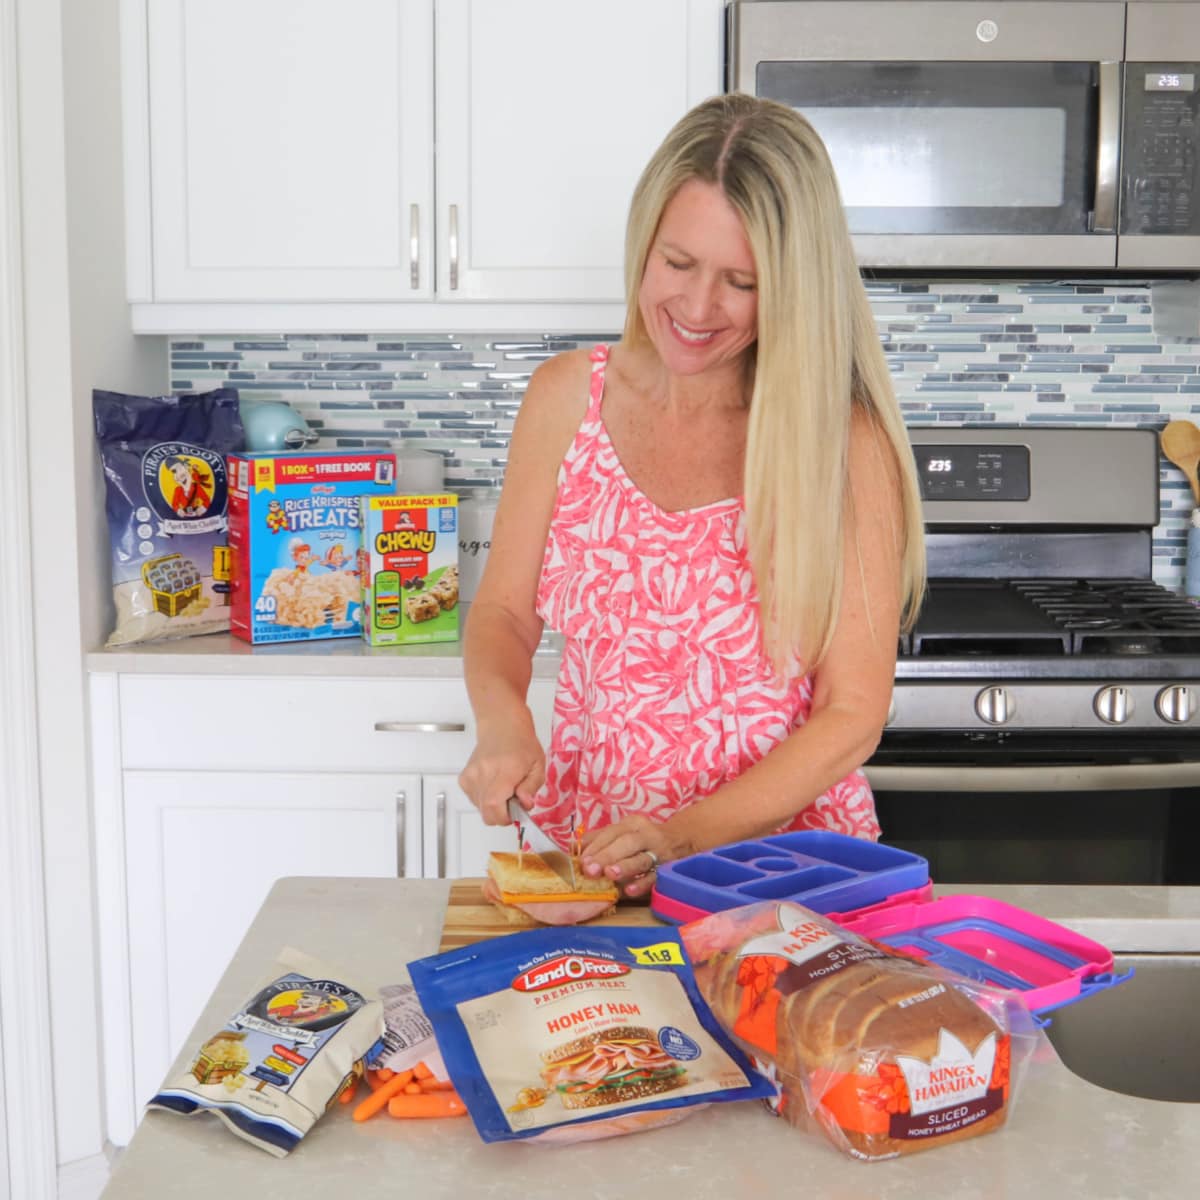 A mom making school lunches